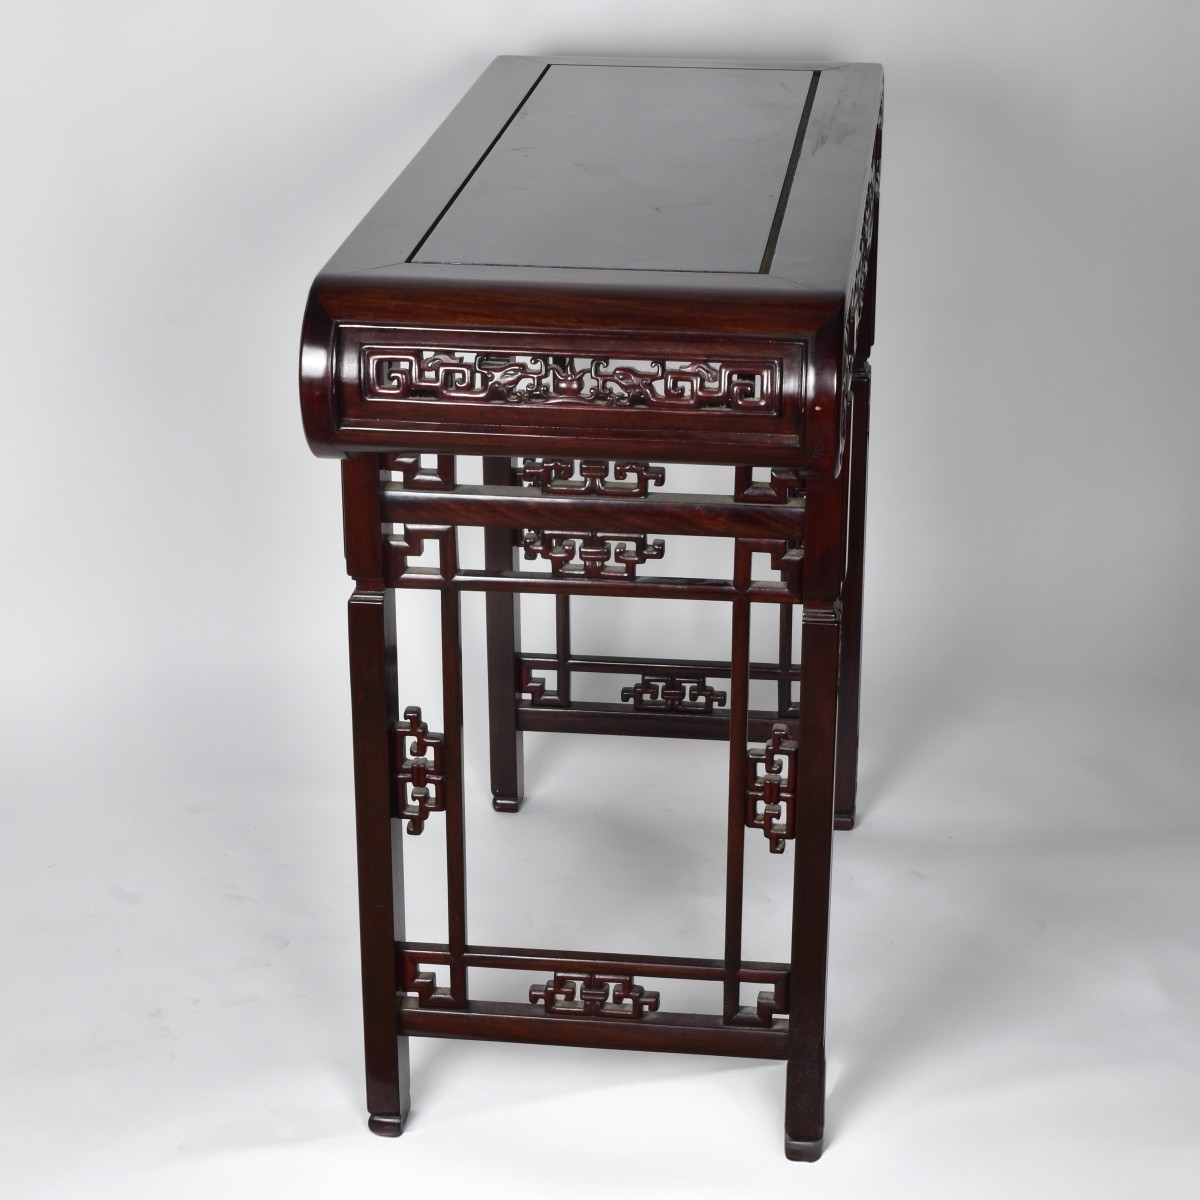 Chinese Carved Ornate Console Table